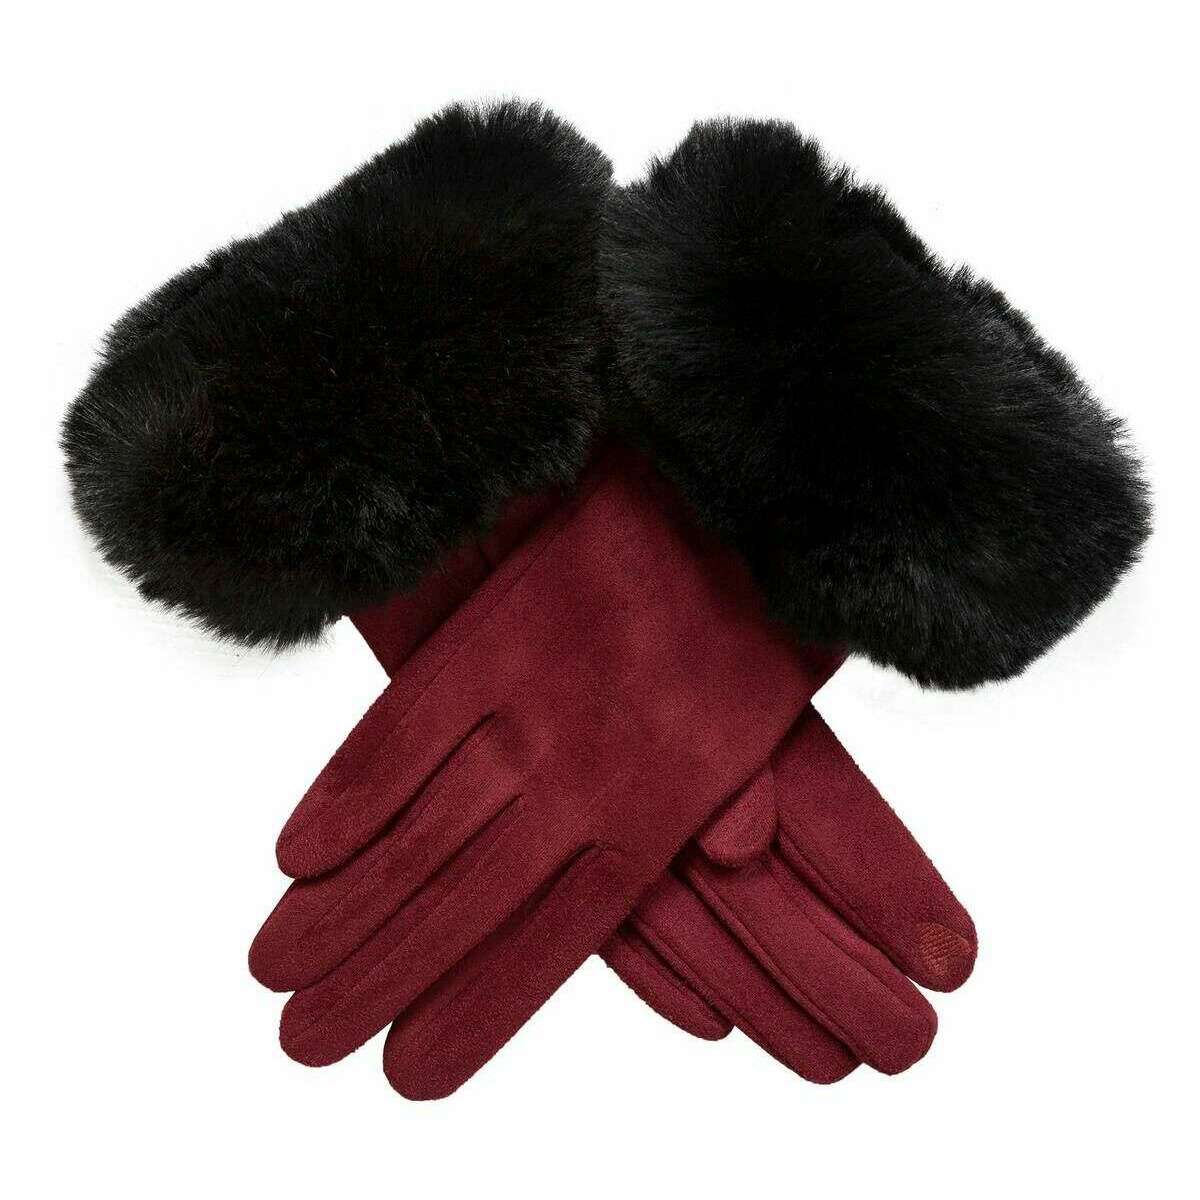 Dents Cuff Touchscreen Velour-Lined Faux Suede Gloves - Berry Red/Black